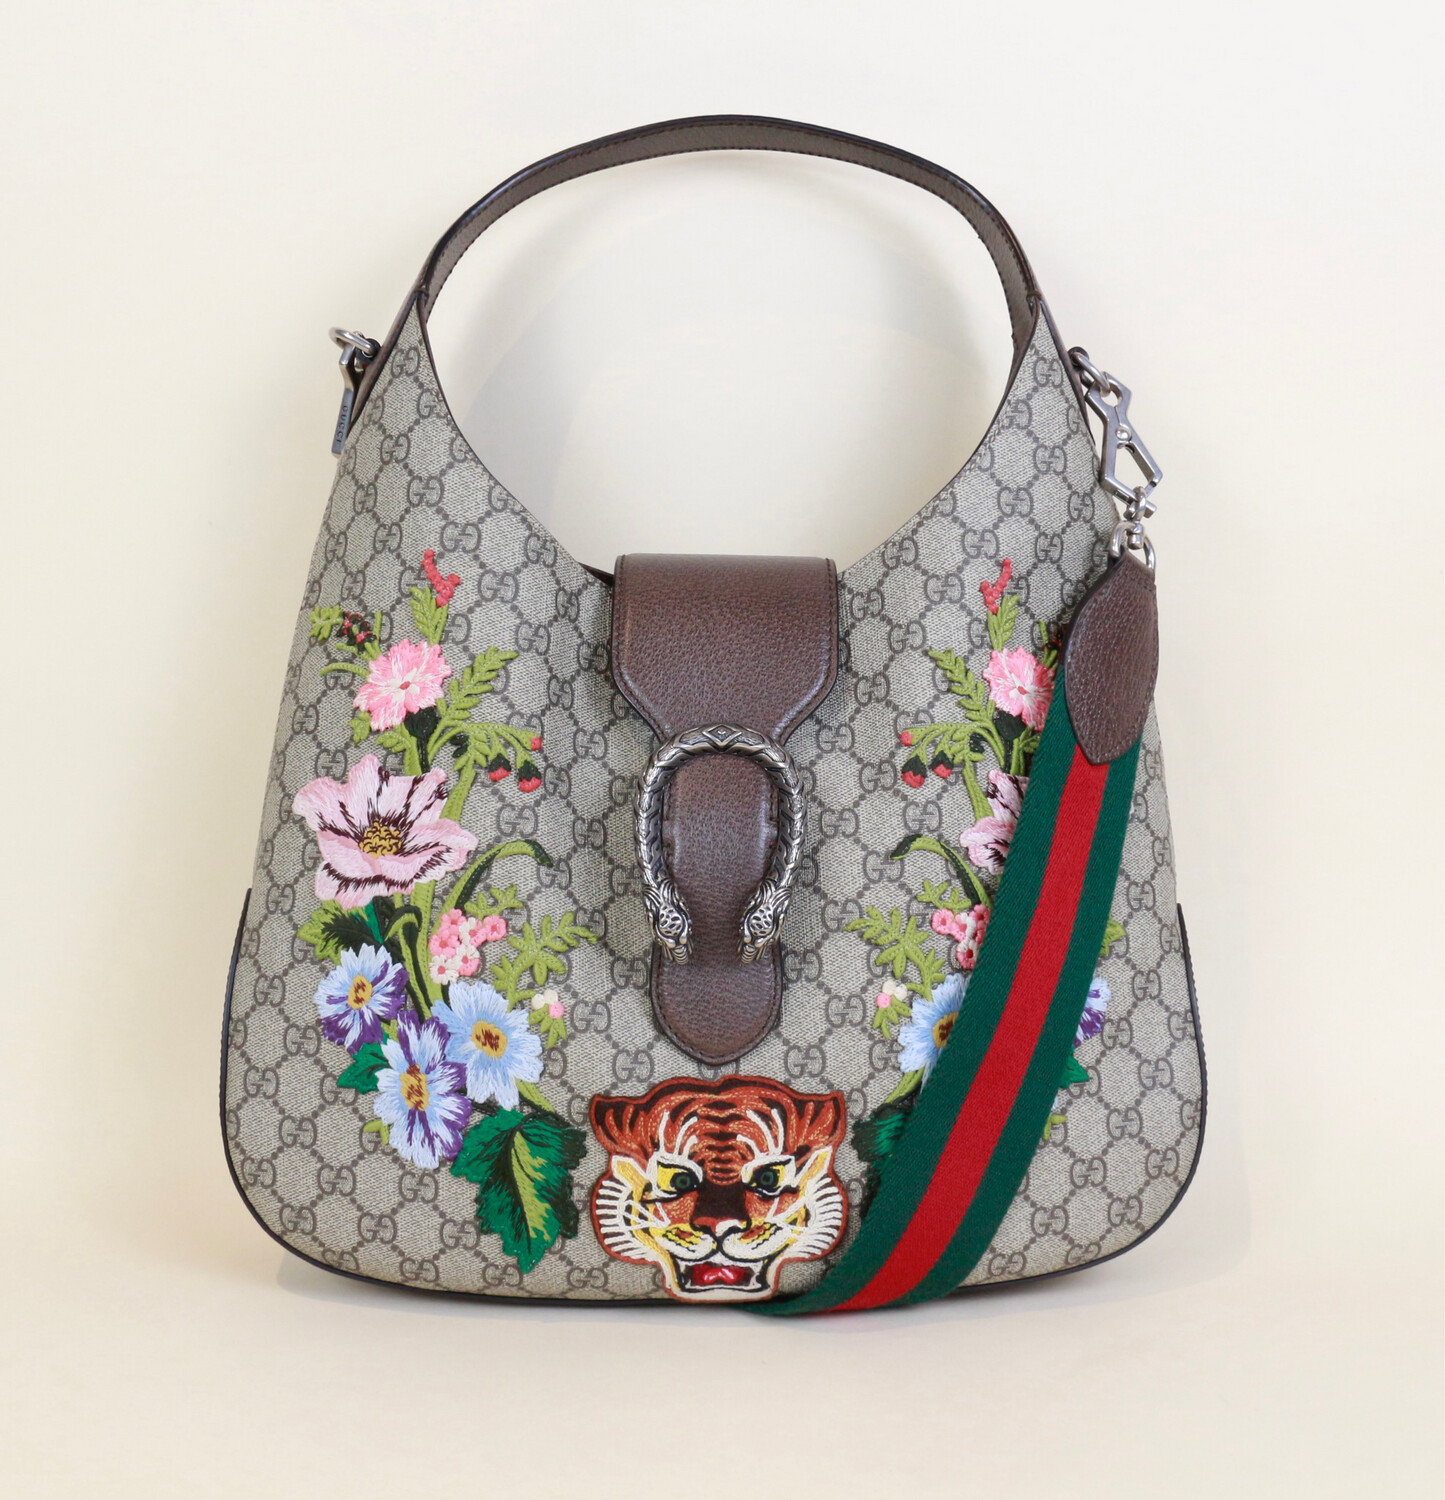 Gucci Dionysus Hobo tote embroidered